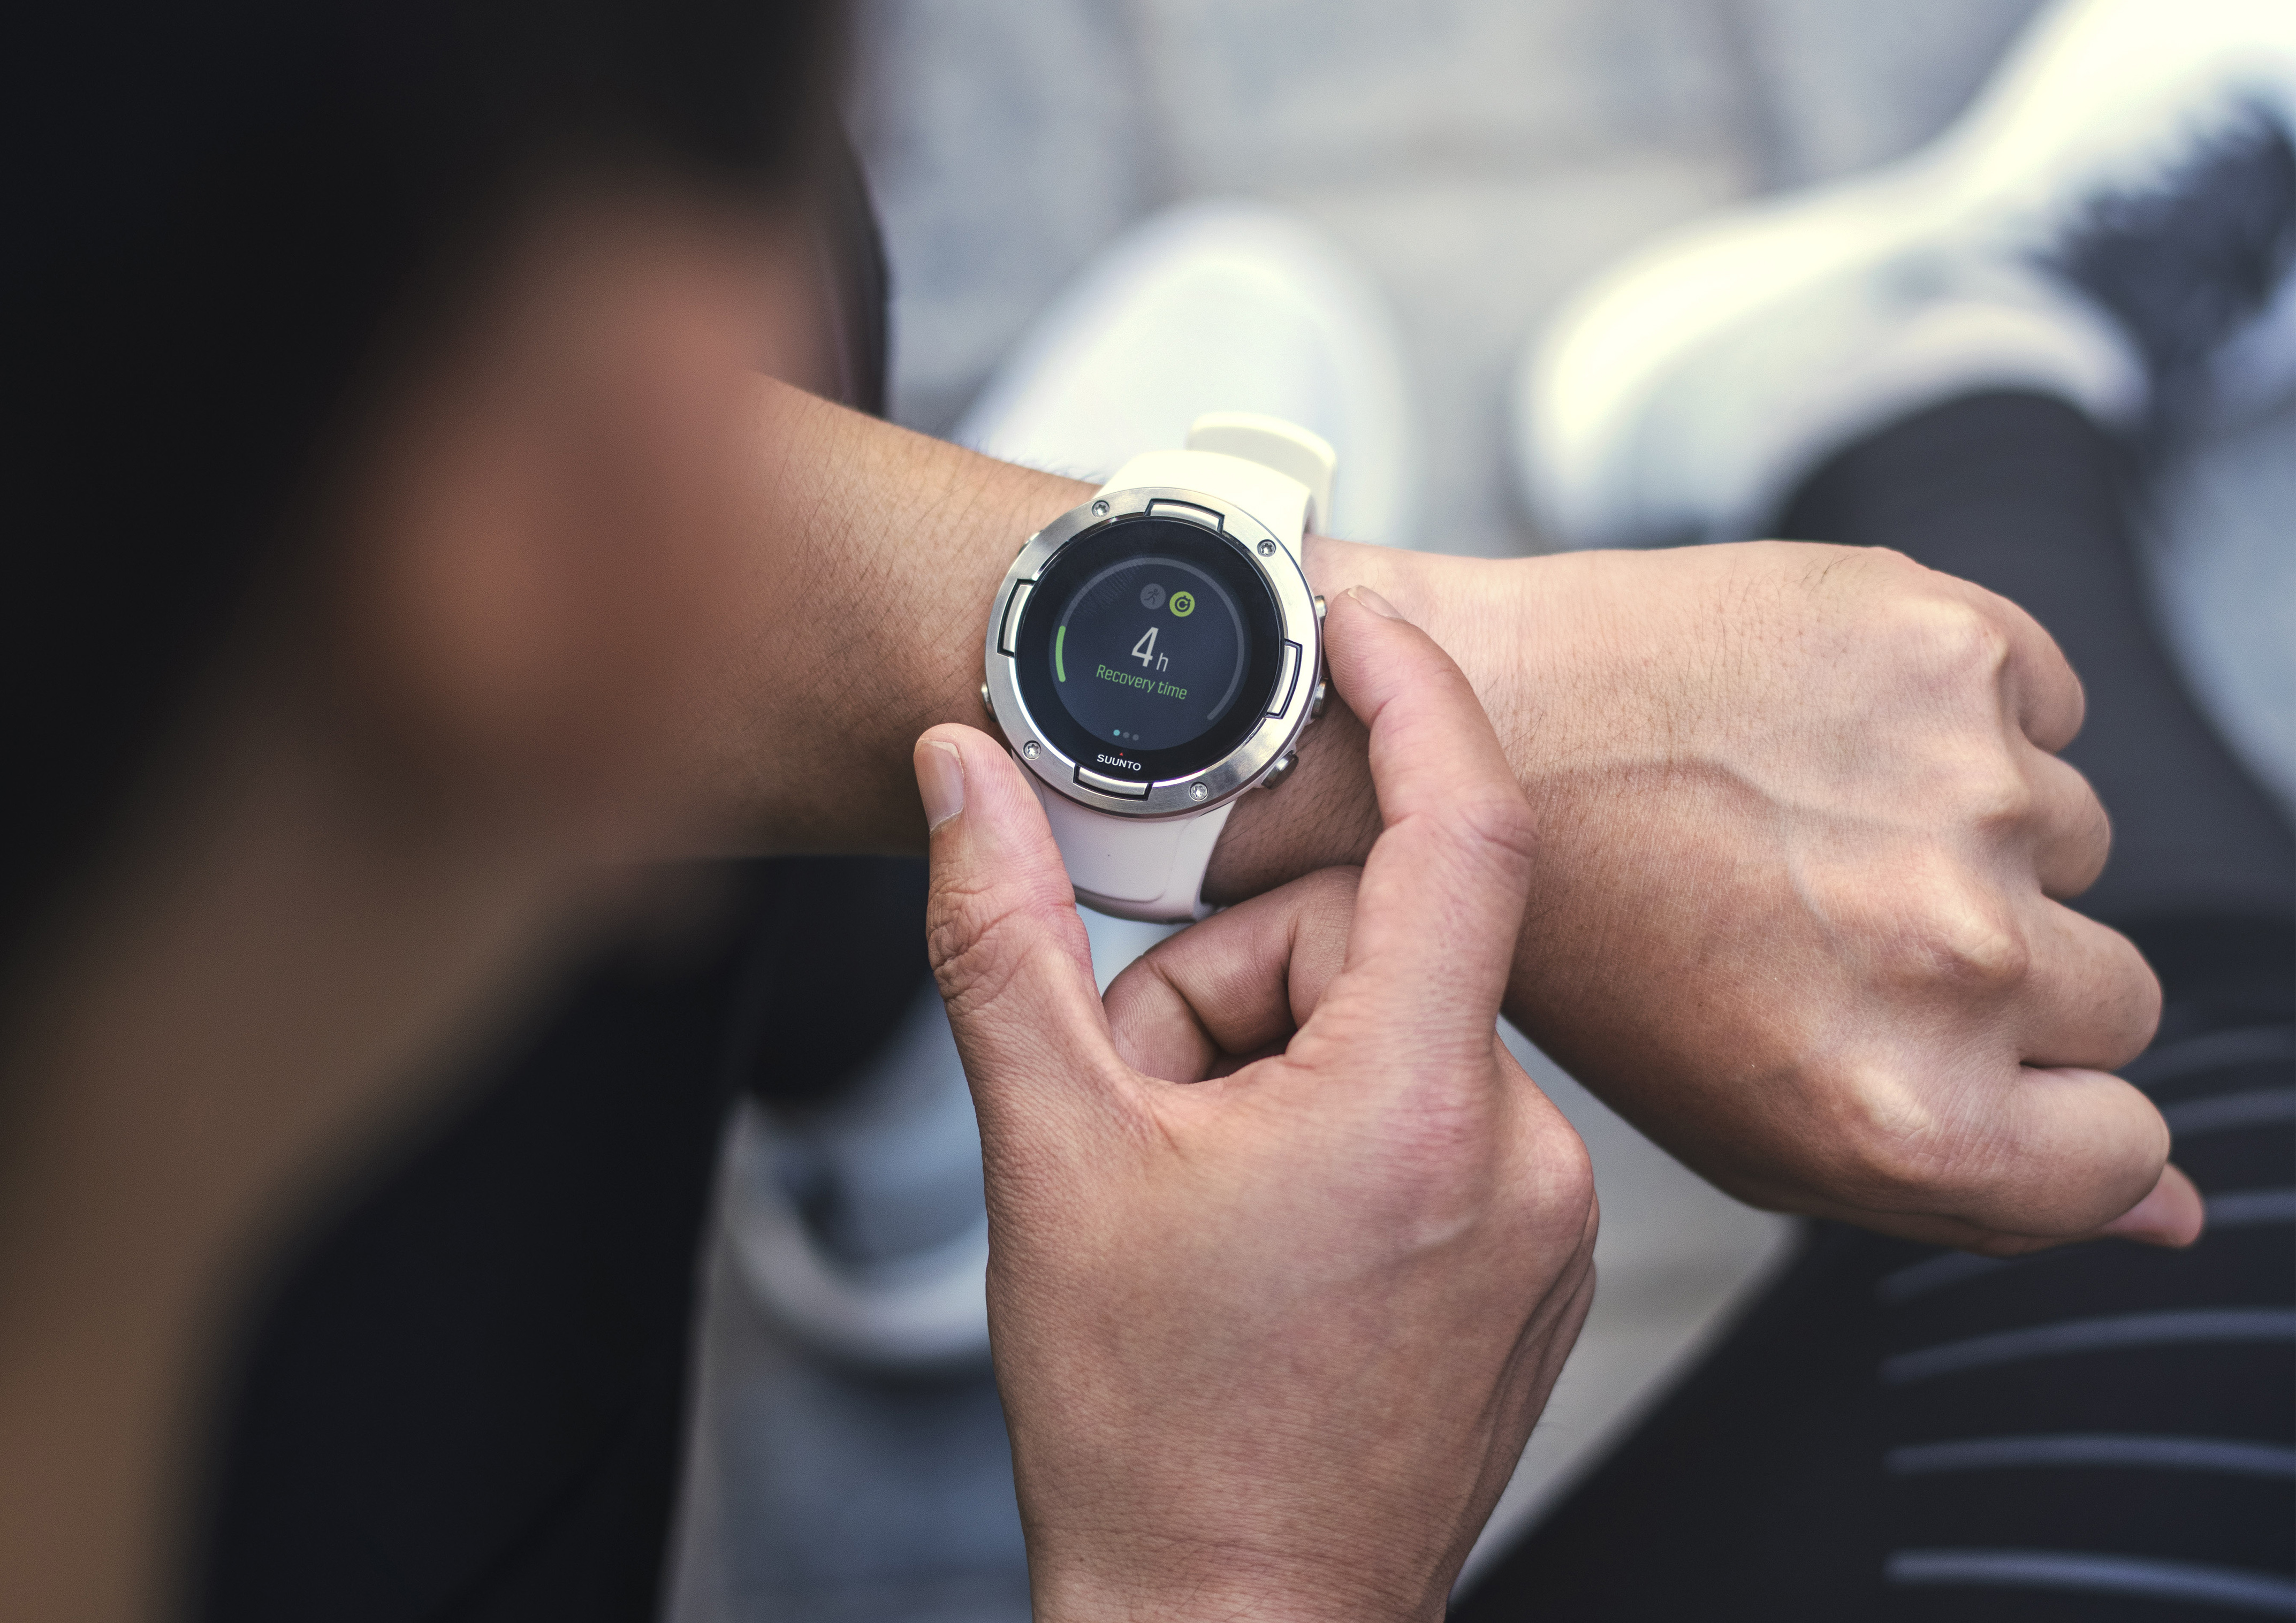 Suunto Core — Recovery For Athletes